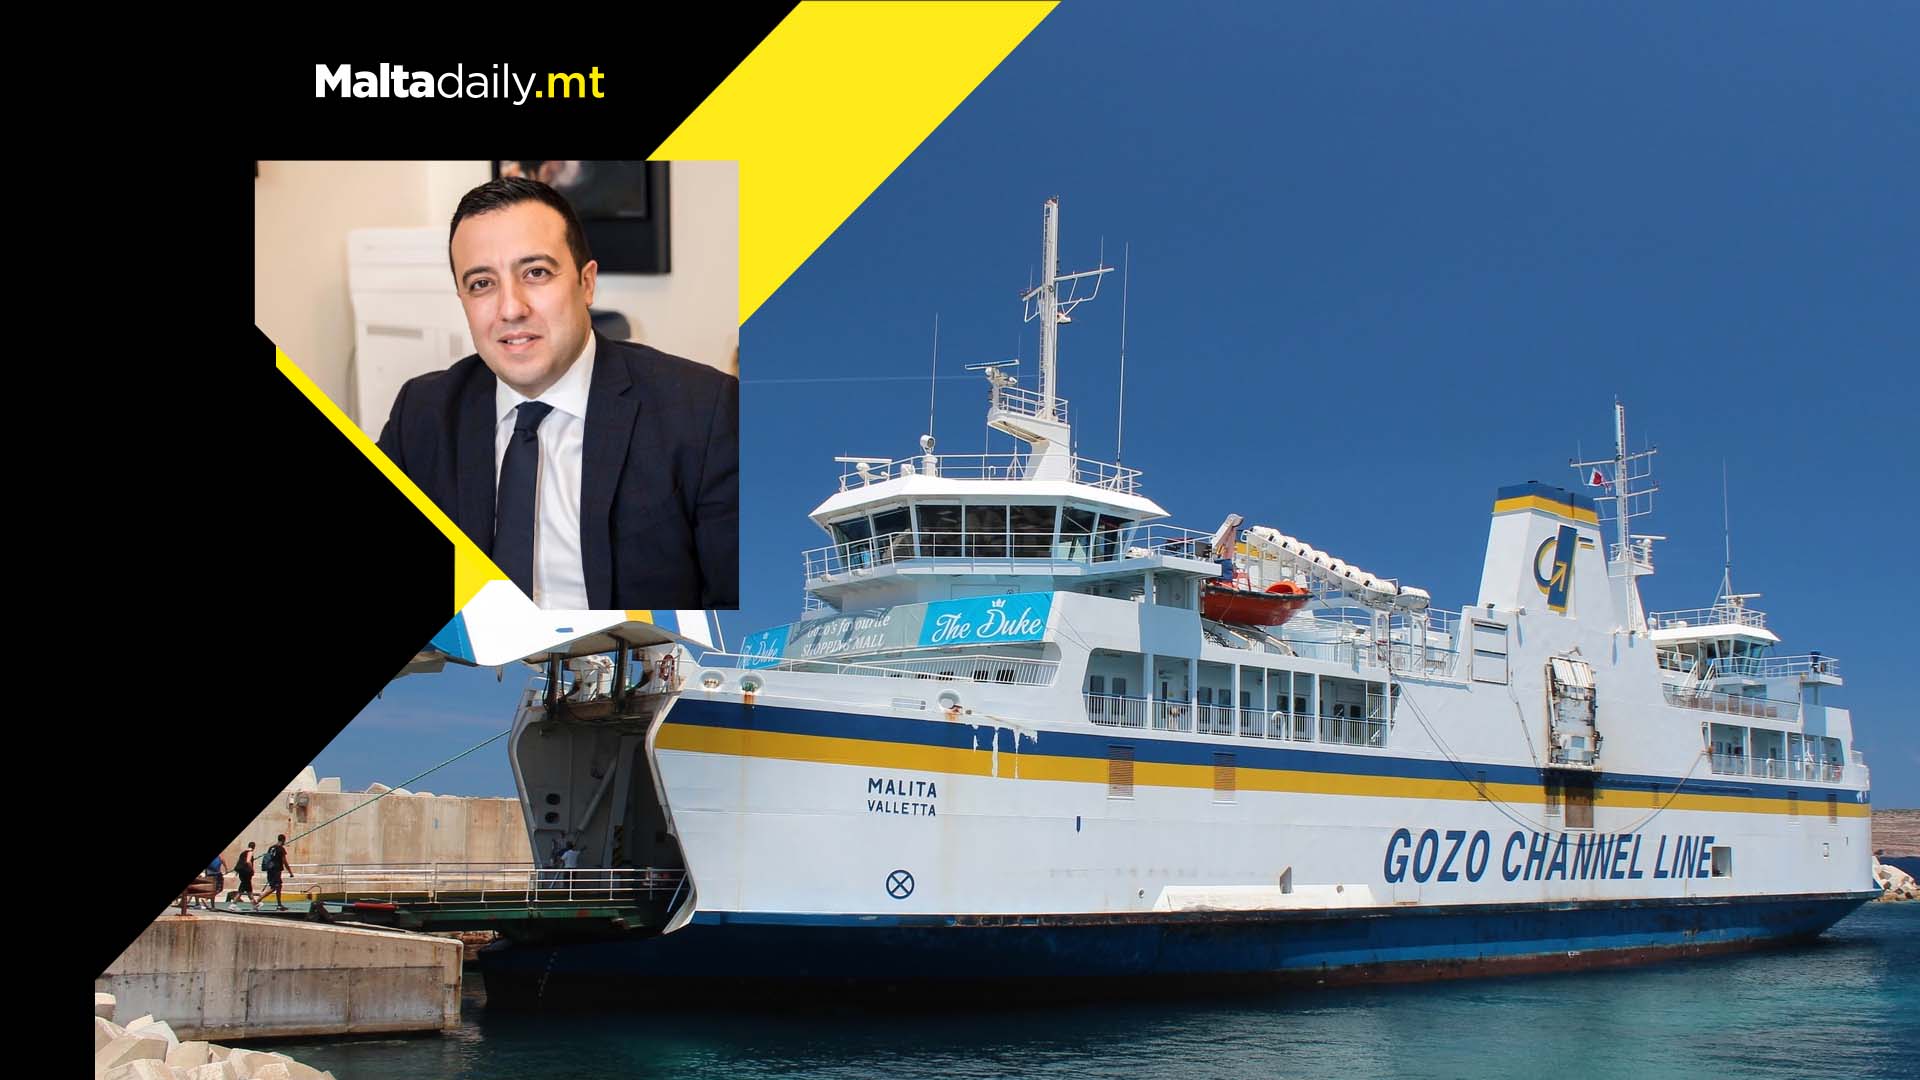 New projects to connect Malta and Gozo together down the line